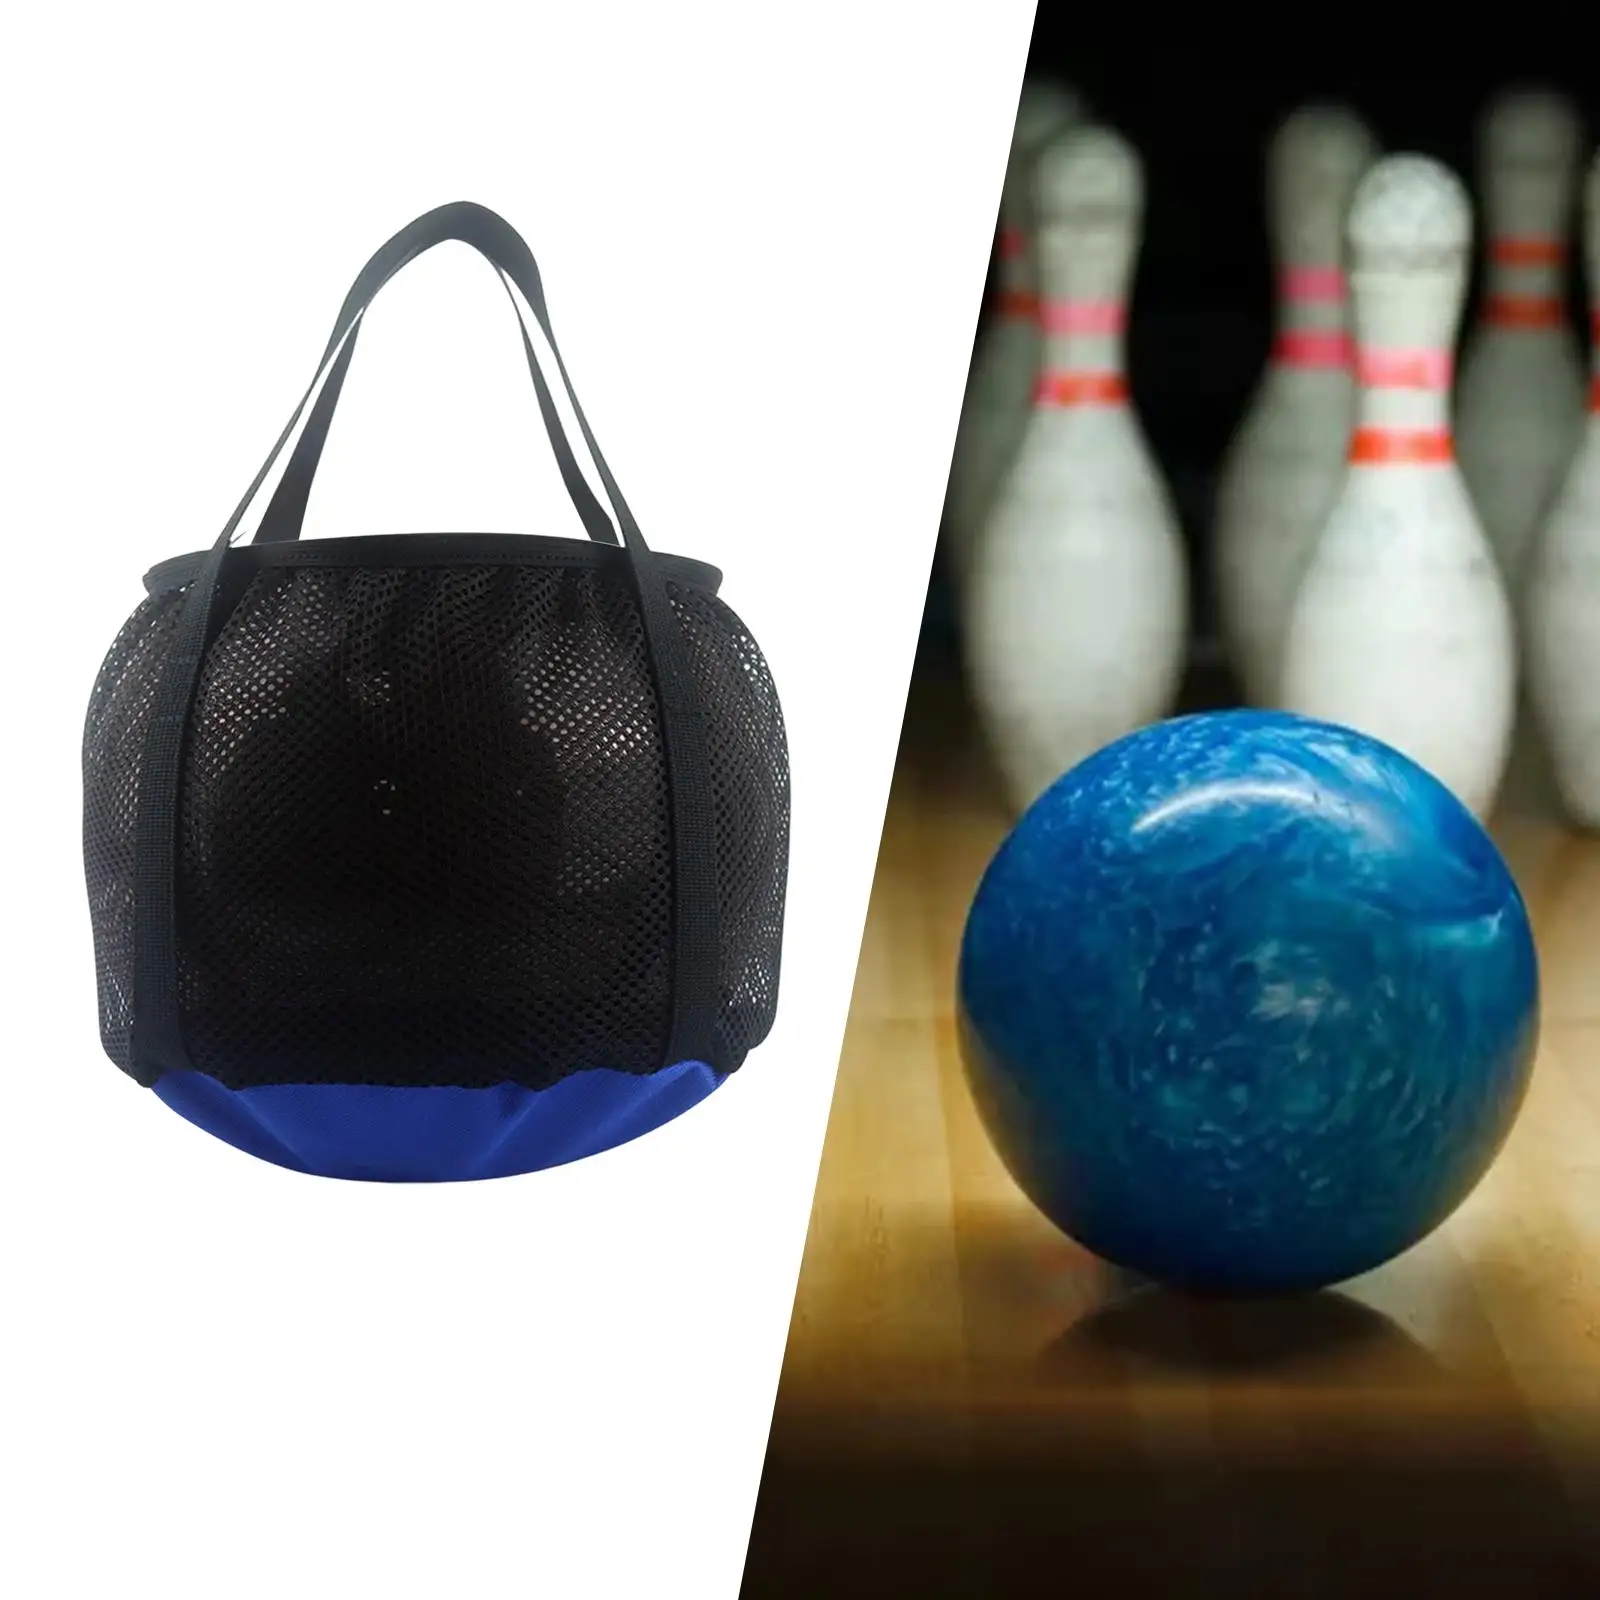 Portable Bowling Ball Bags Bowling Ball Holder with Handle Sport Pocket Tote Equipment Pouch for Women Men Gym Exercise 1 Ball